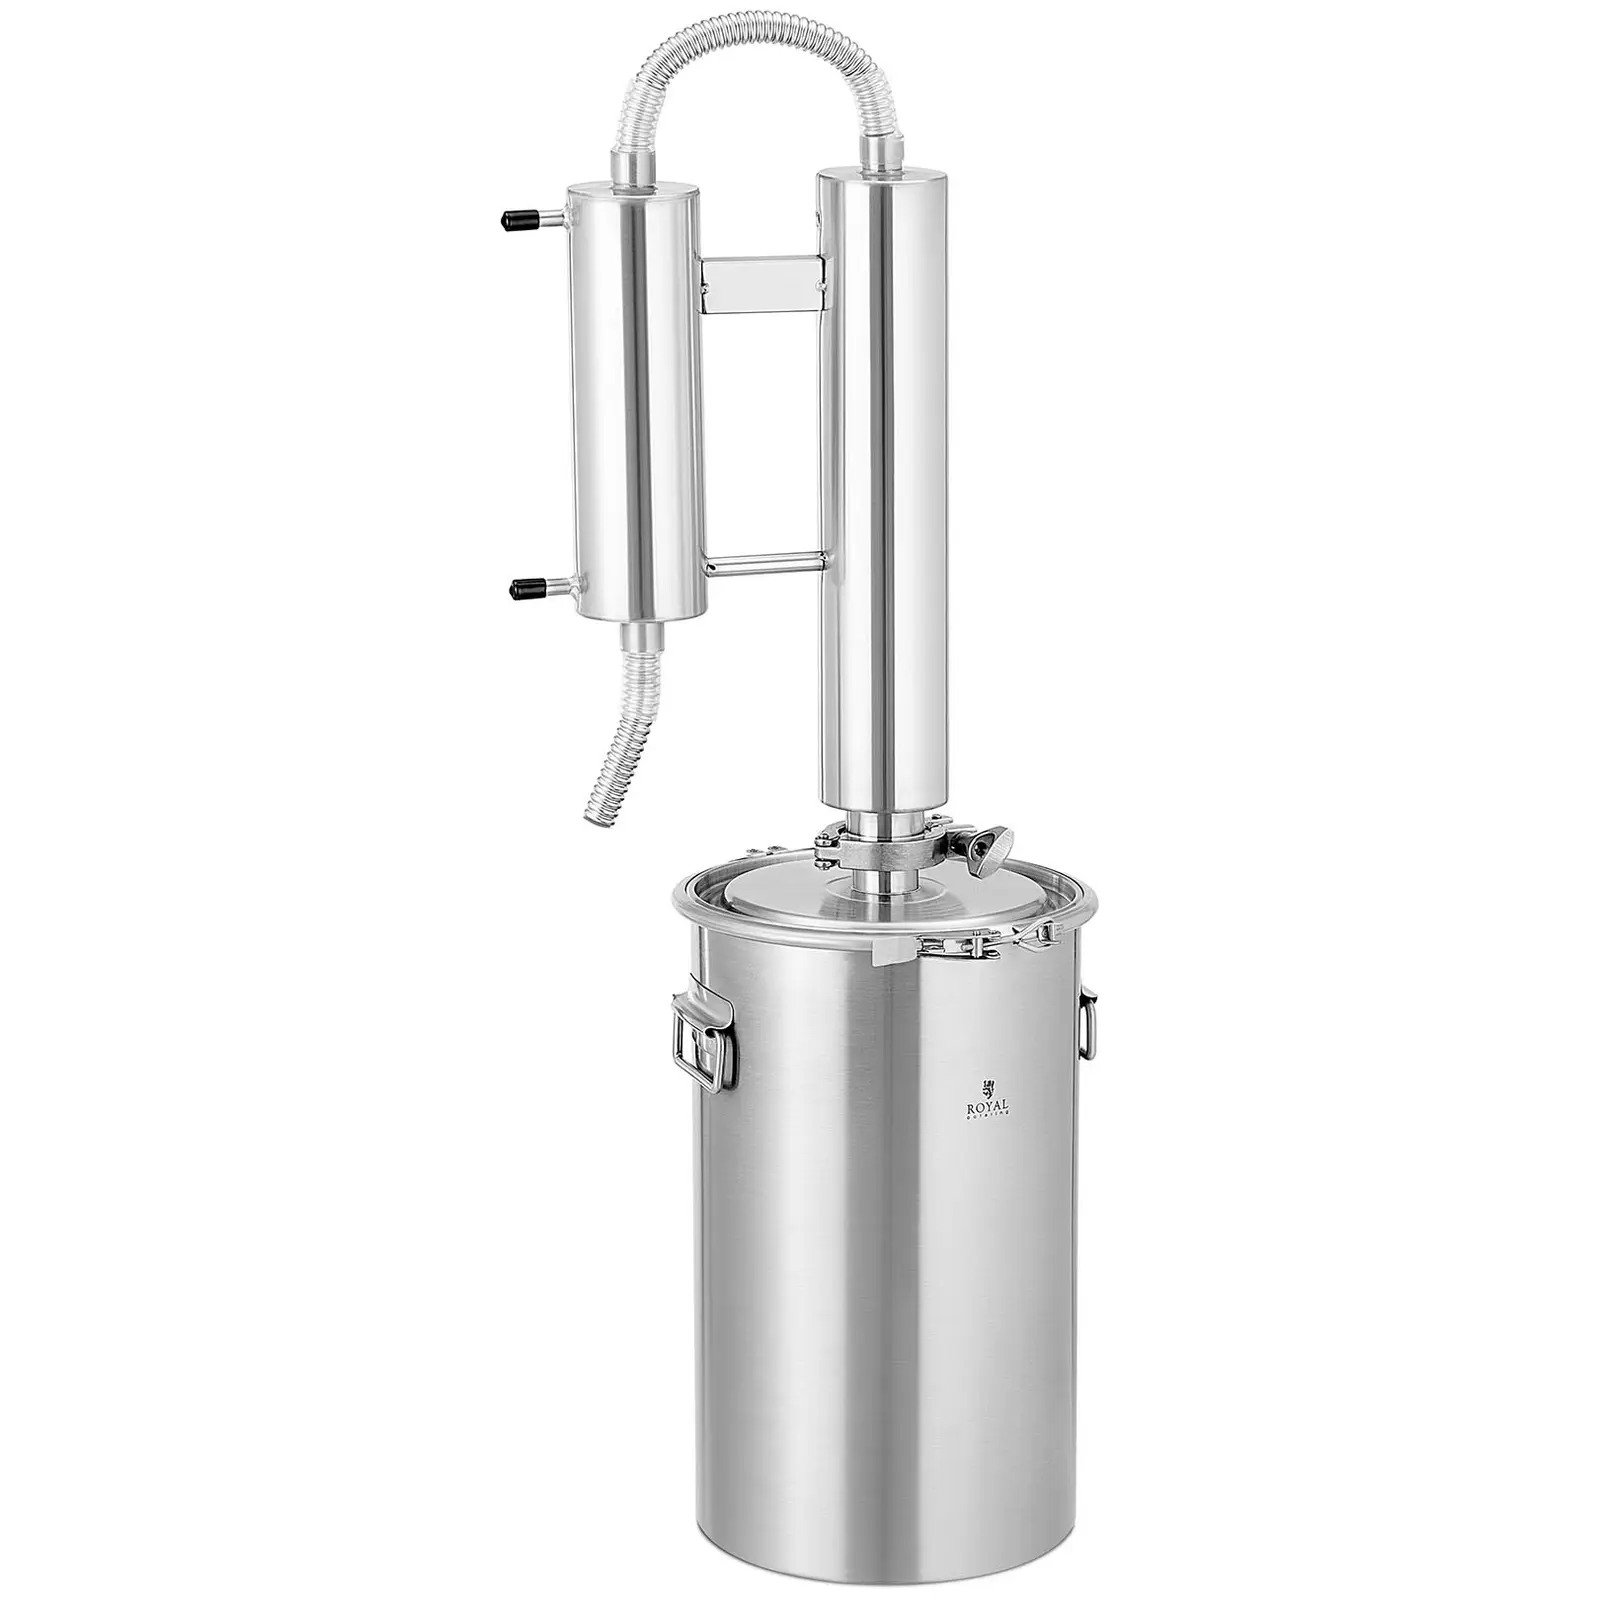 Factory second Water Distiller - Stainless steel - 20 L - Royal Catering